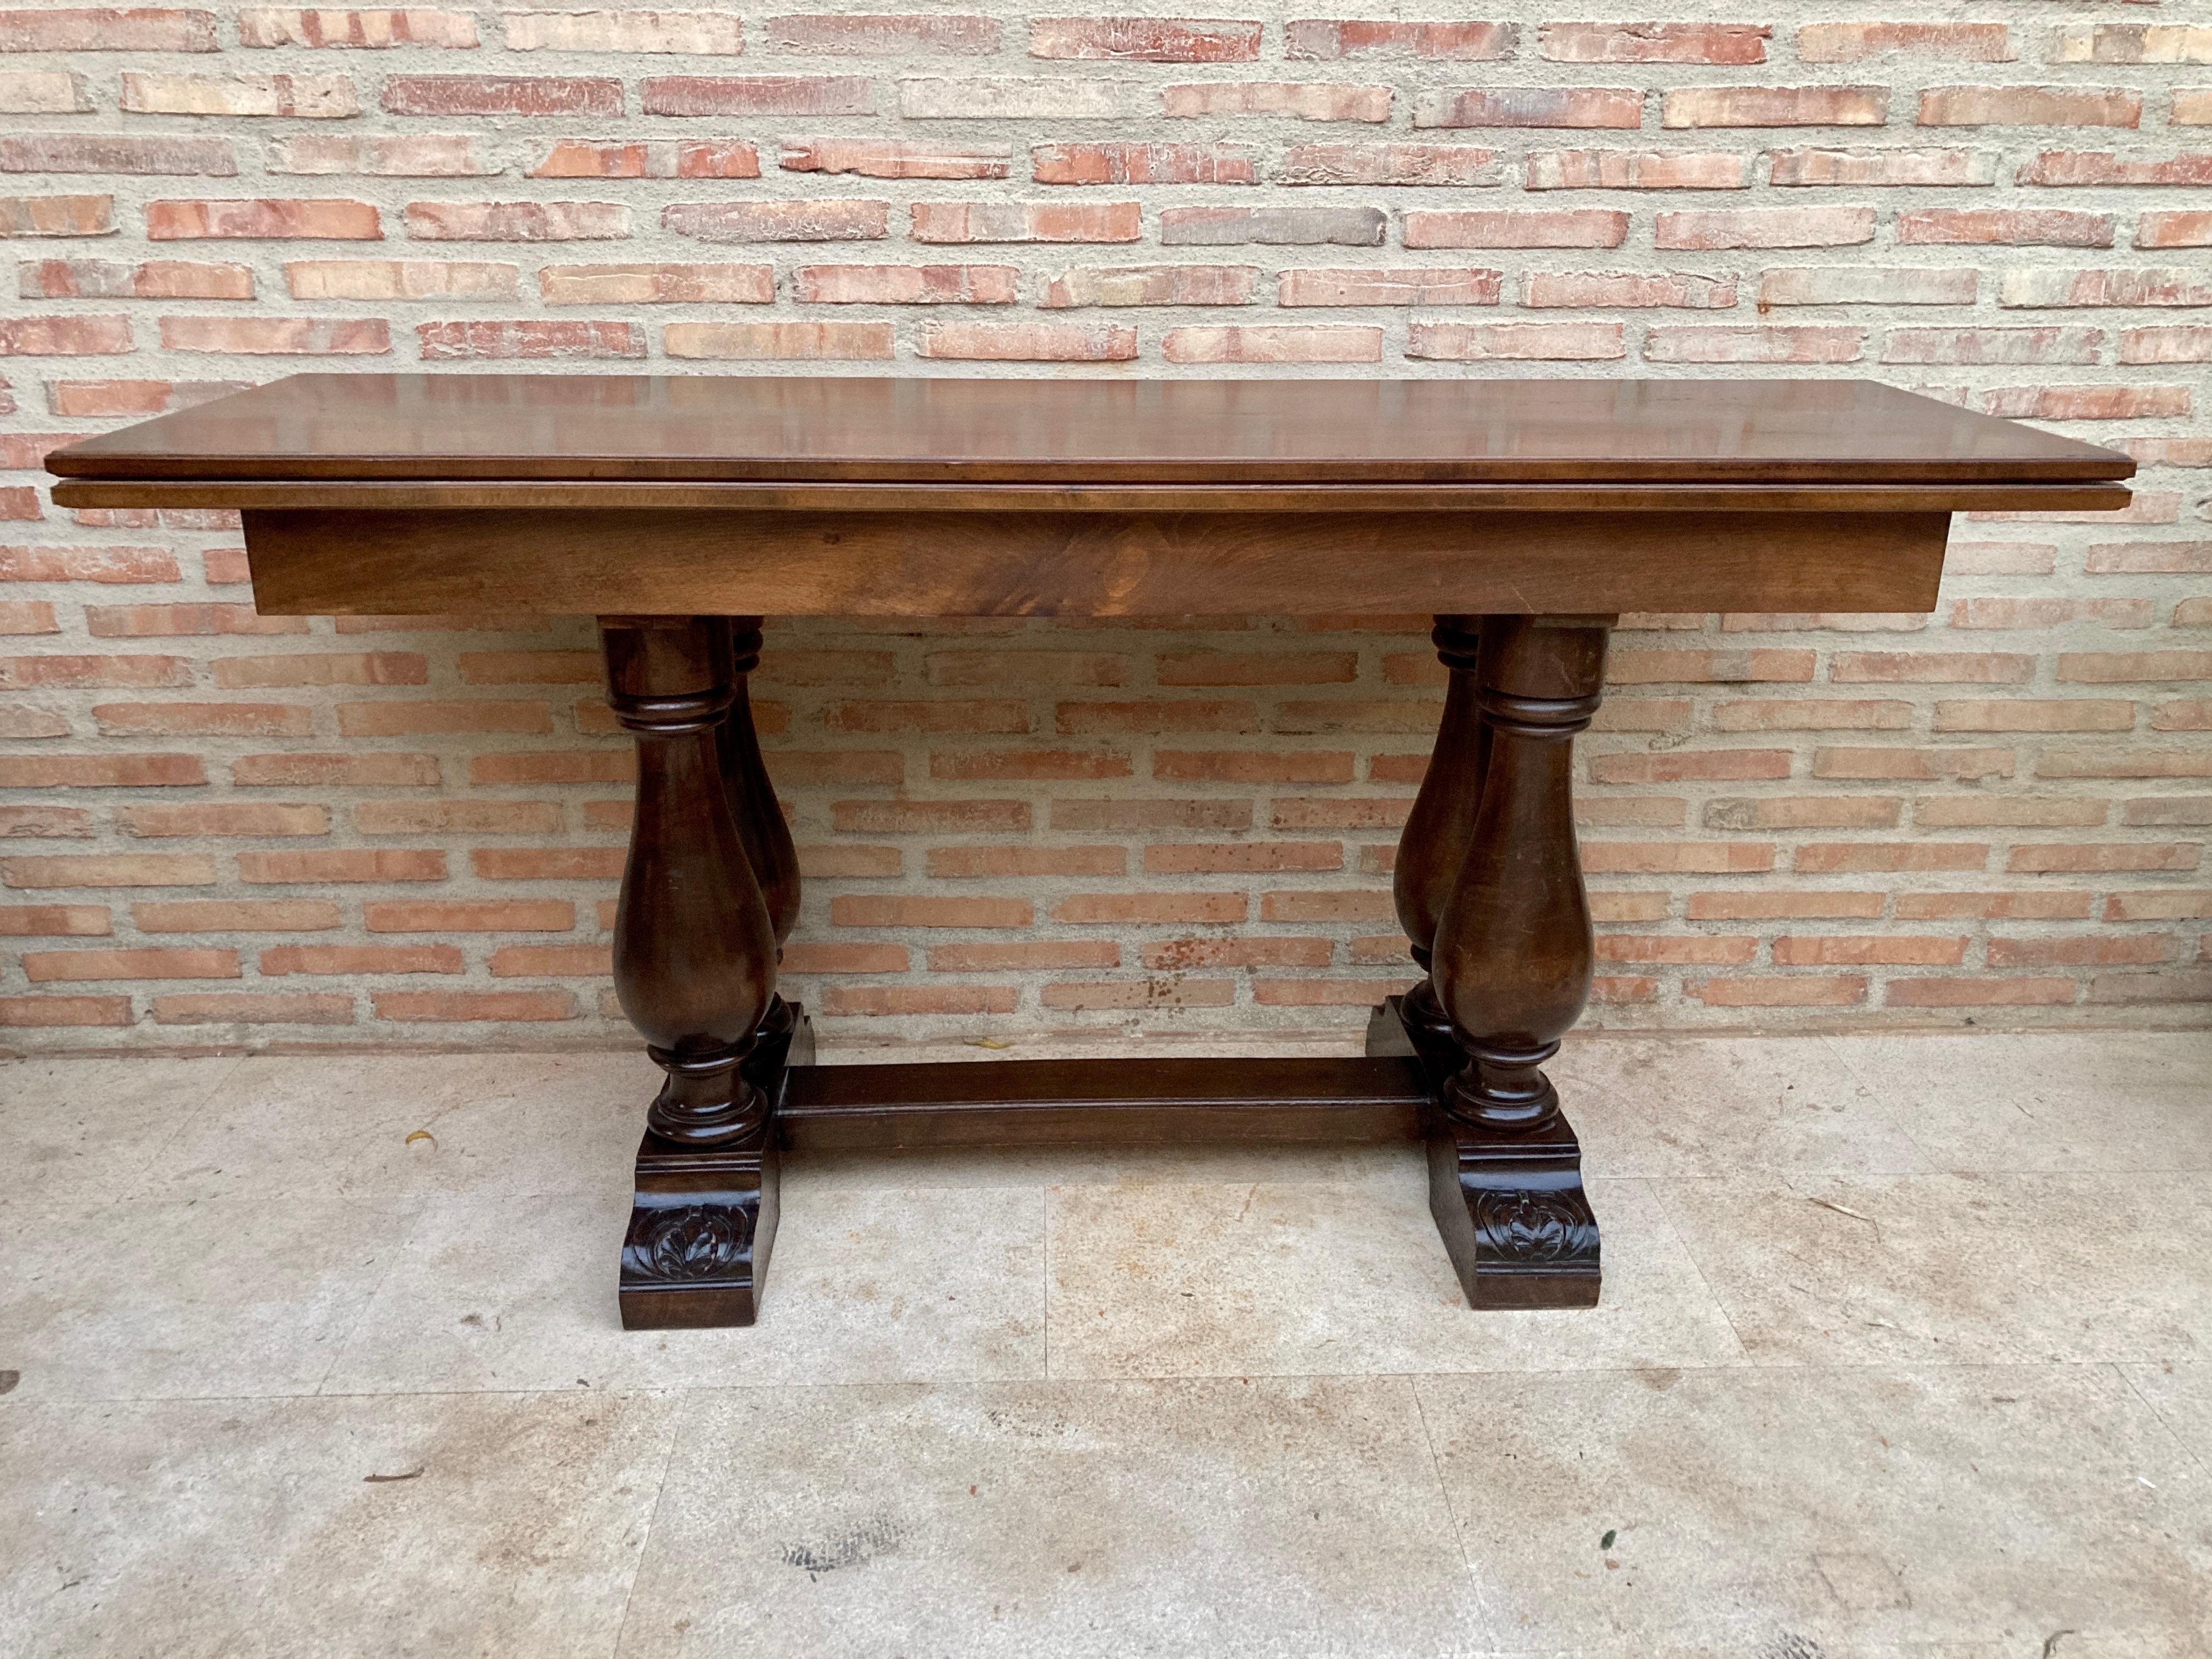 Spanish oak dining table foldable lengthwise console table with four column legs, circa 1960.
Spanish oak console table.
The longitudinal folding allows transformation into a dining table.
Its 4 column-shaped legs are carved at its base and are